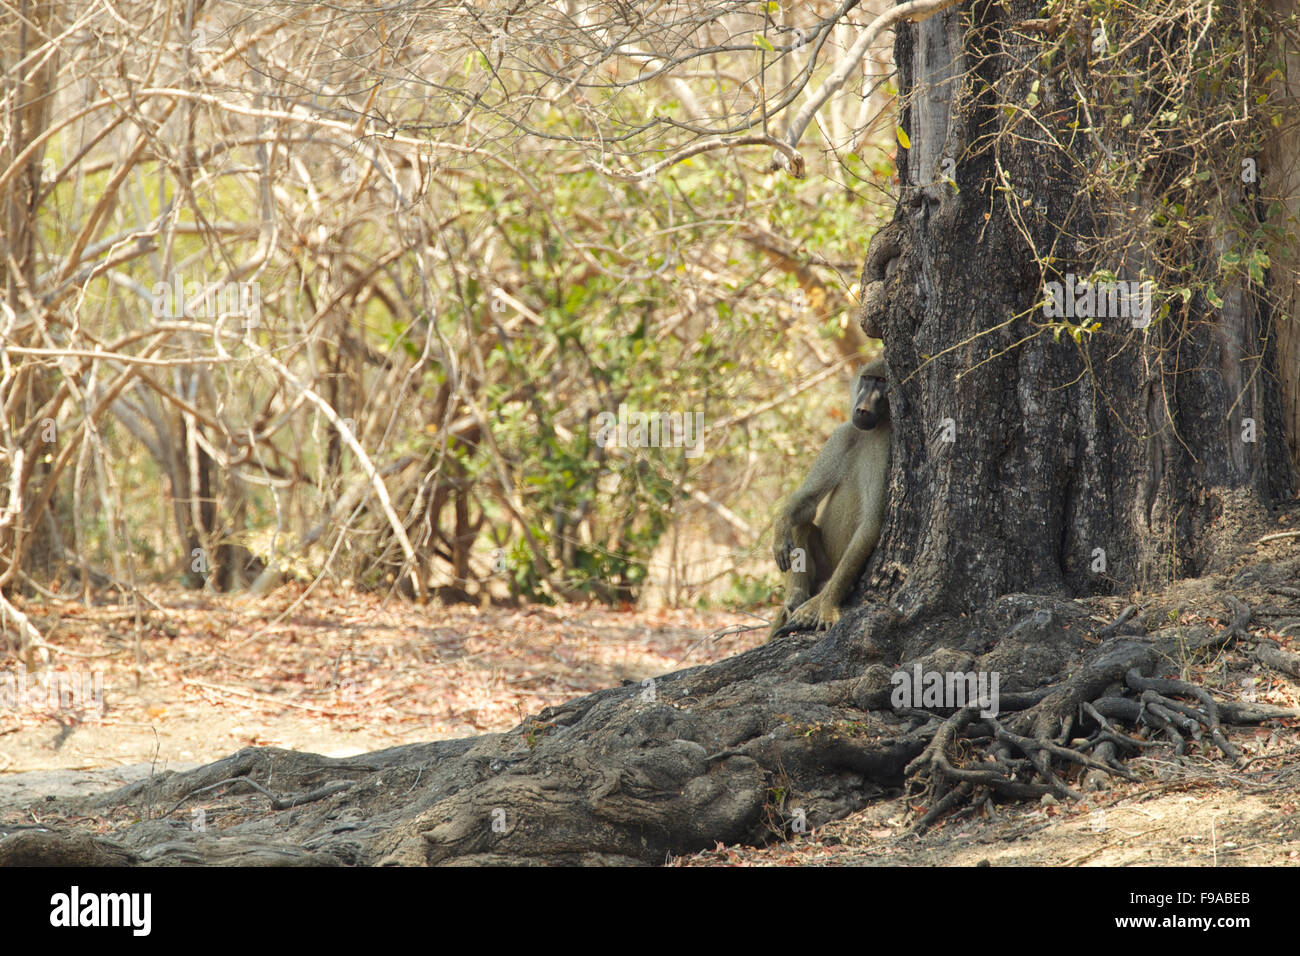 A baboon sitting in the shade of a tree, Mana Pools Zimbabwe Stock Photo